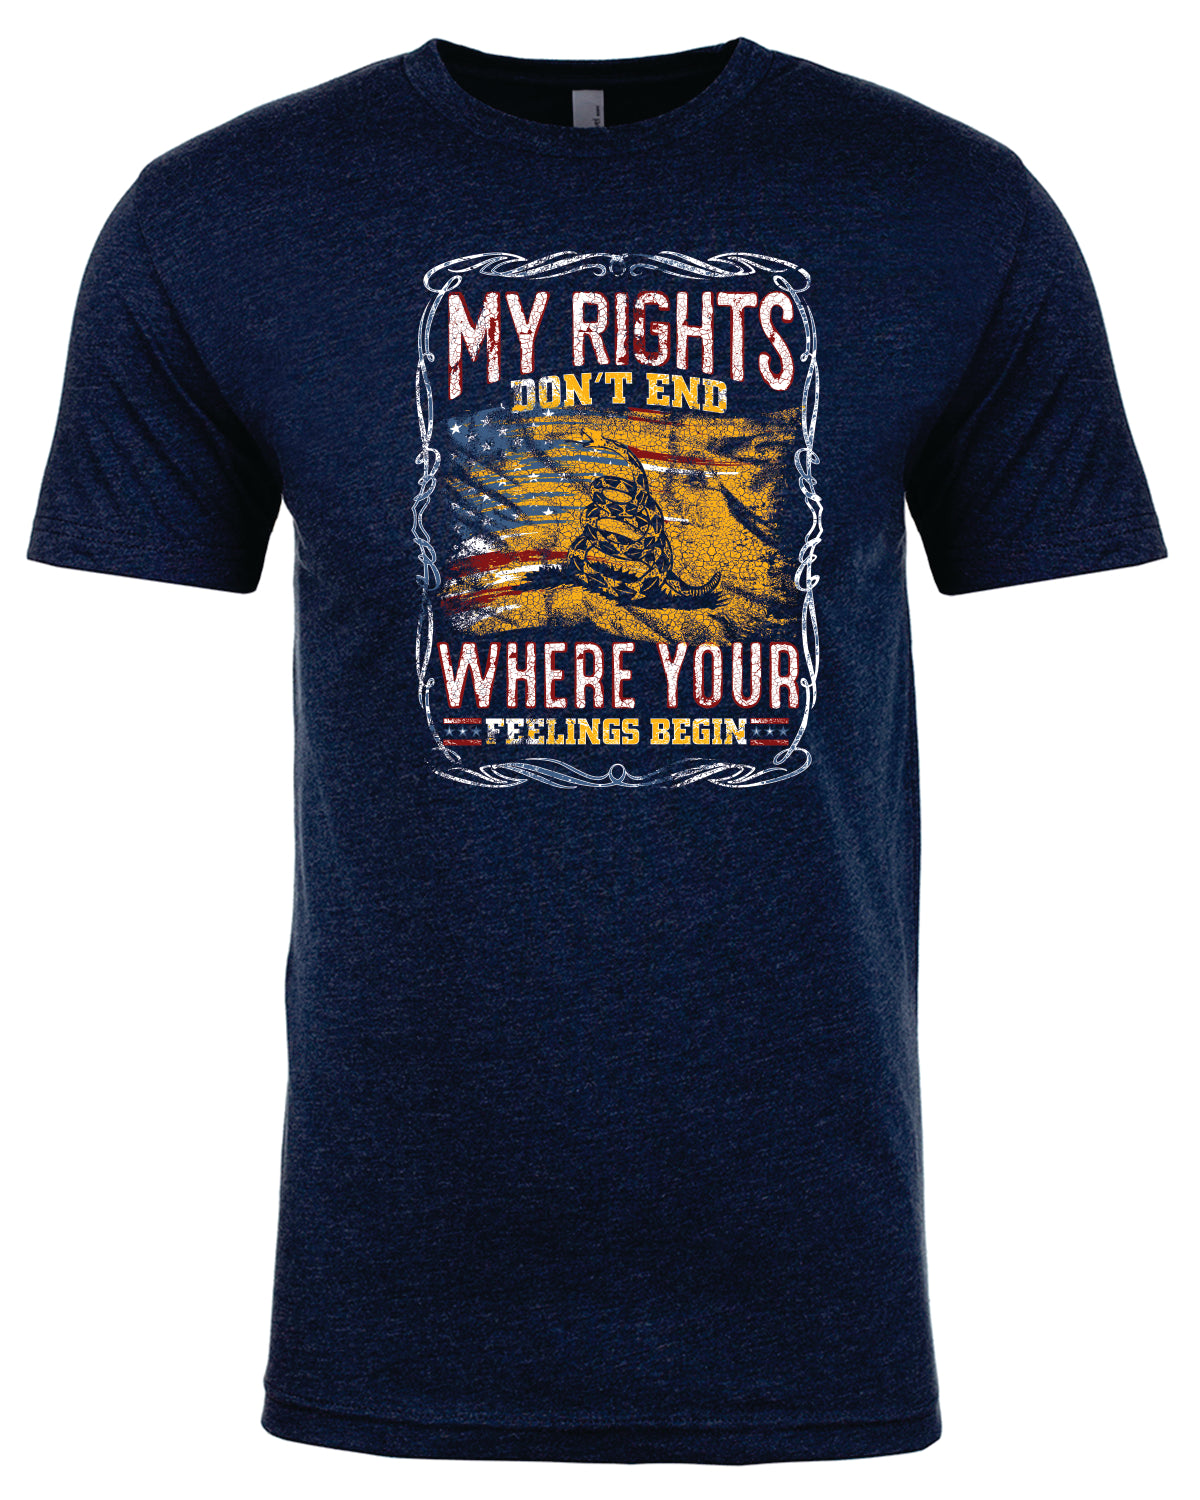 My Rights T-shirt